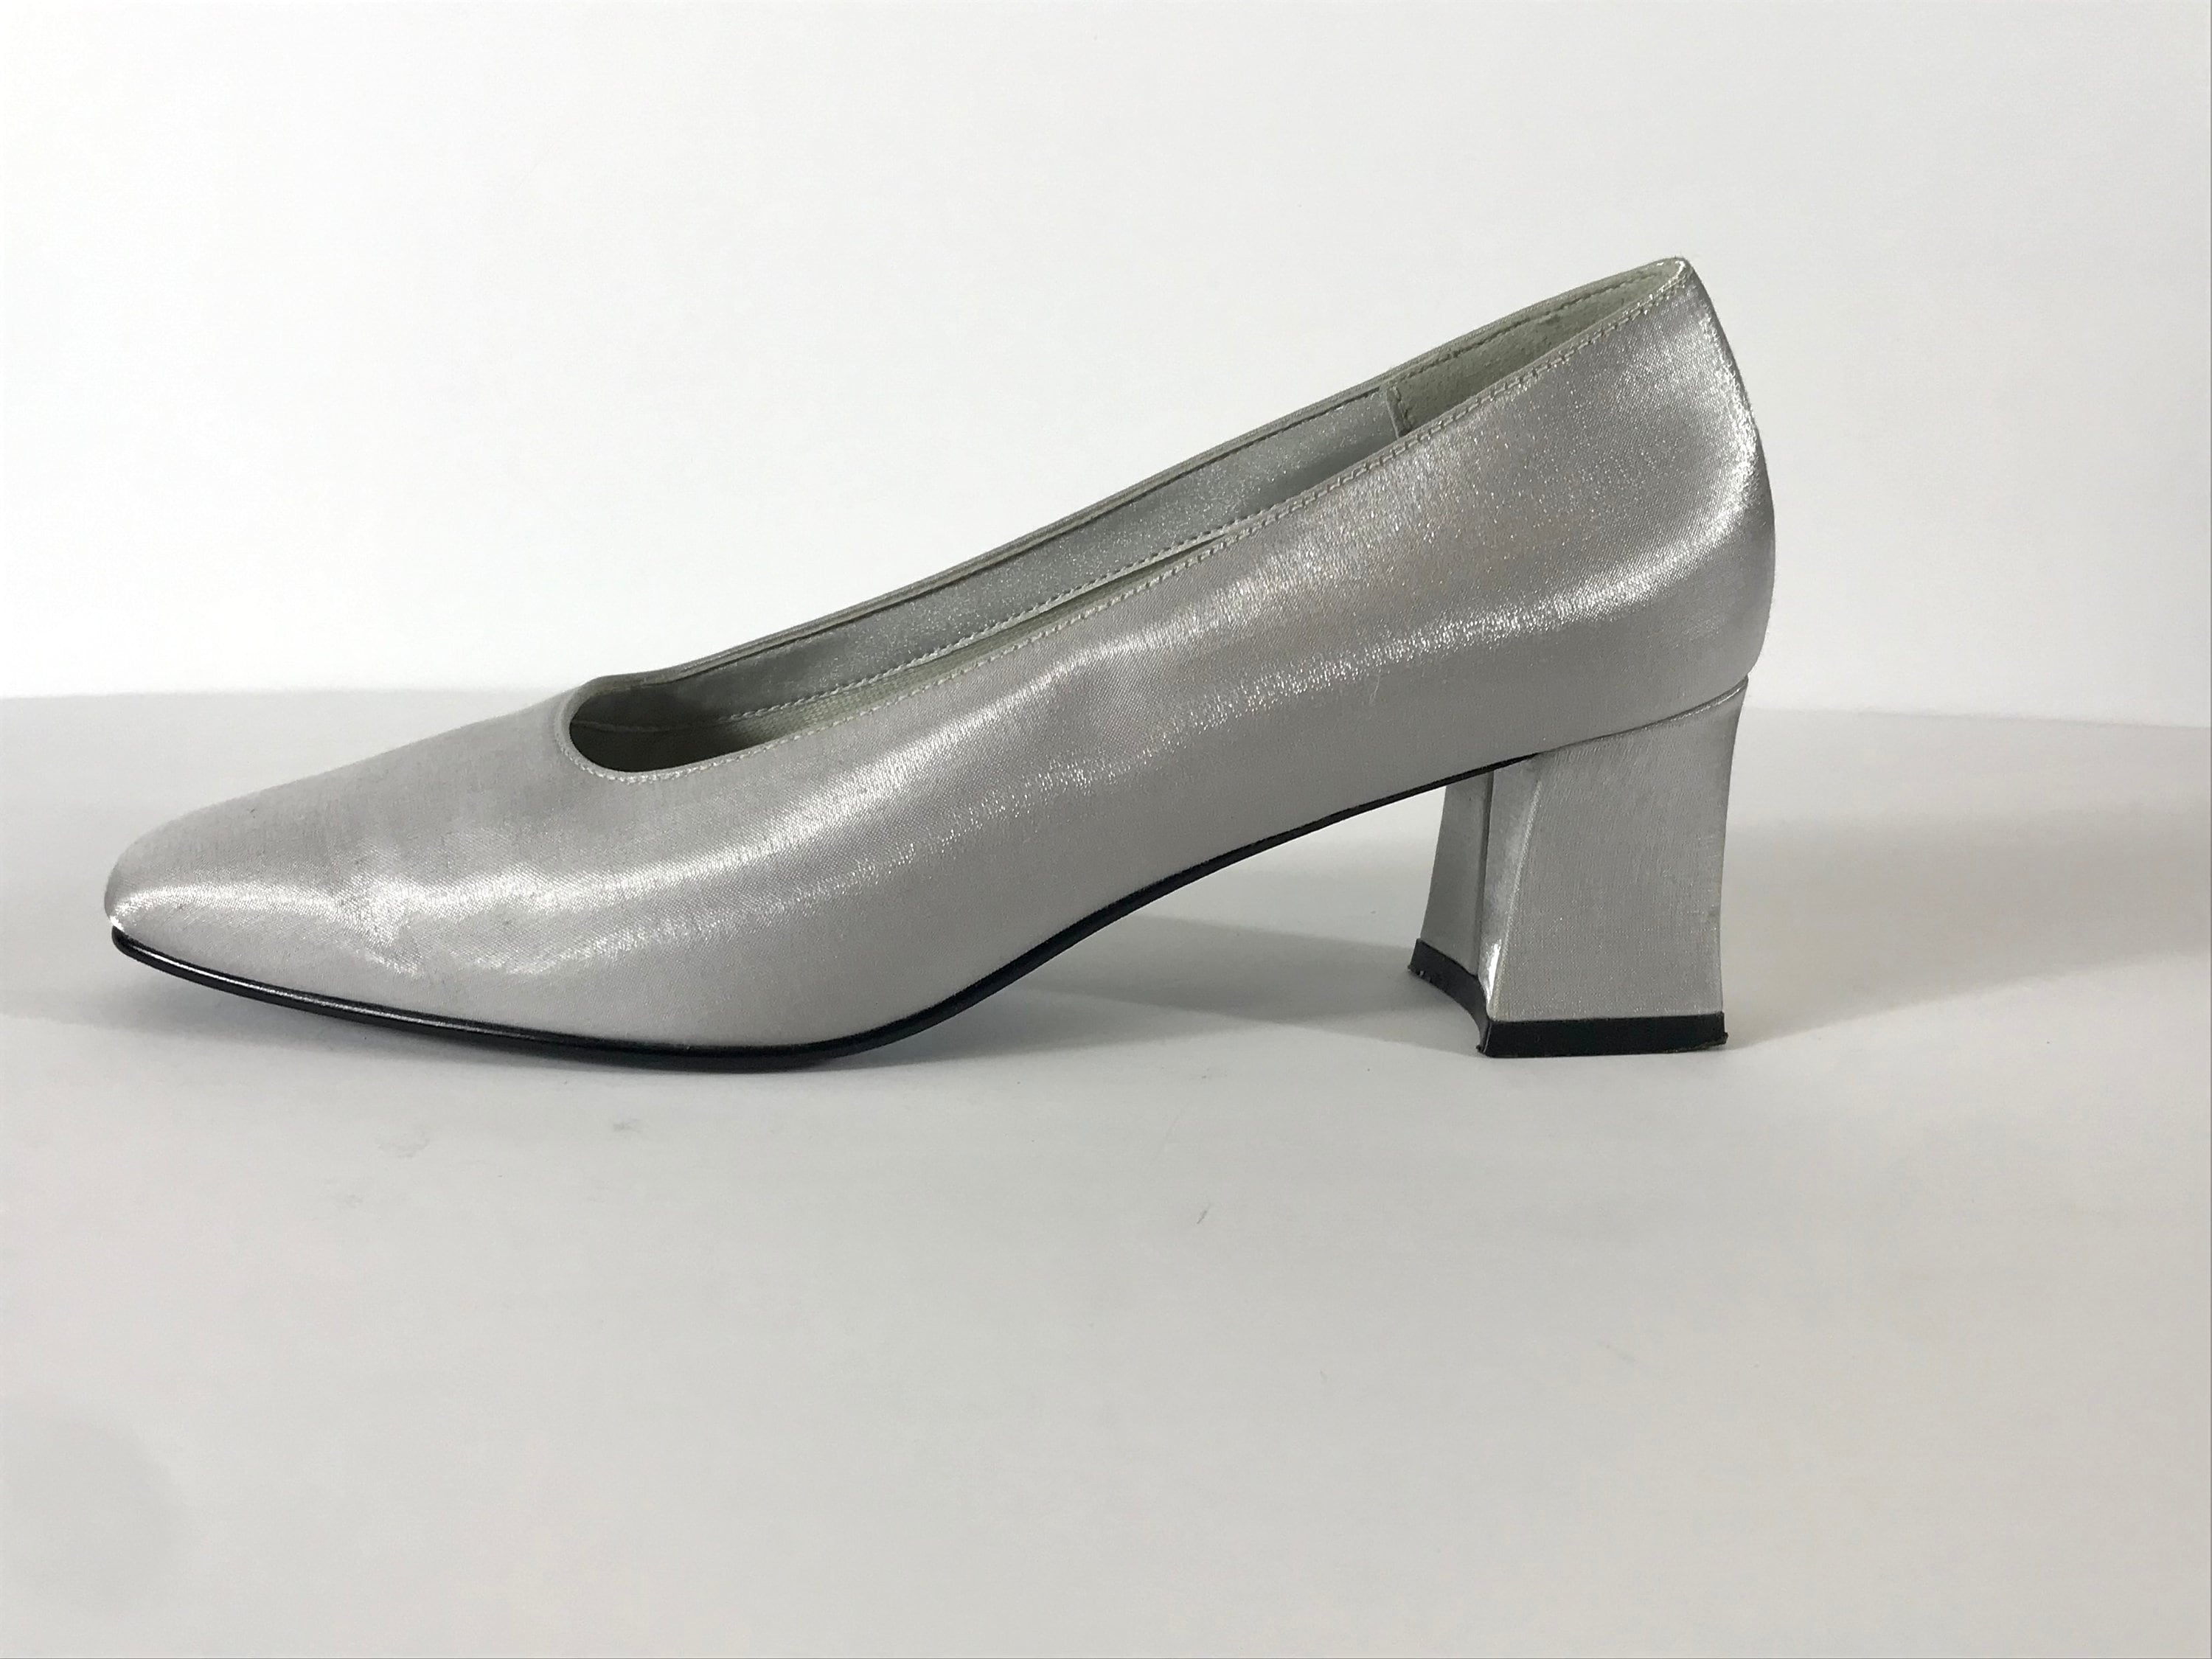 Paradox London Francis Wide Fit Glitter Block Heel Court Shoes, Silver at  John Lewis & Partners